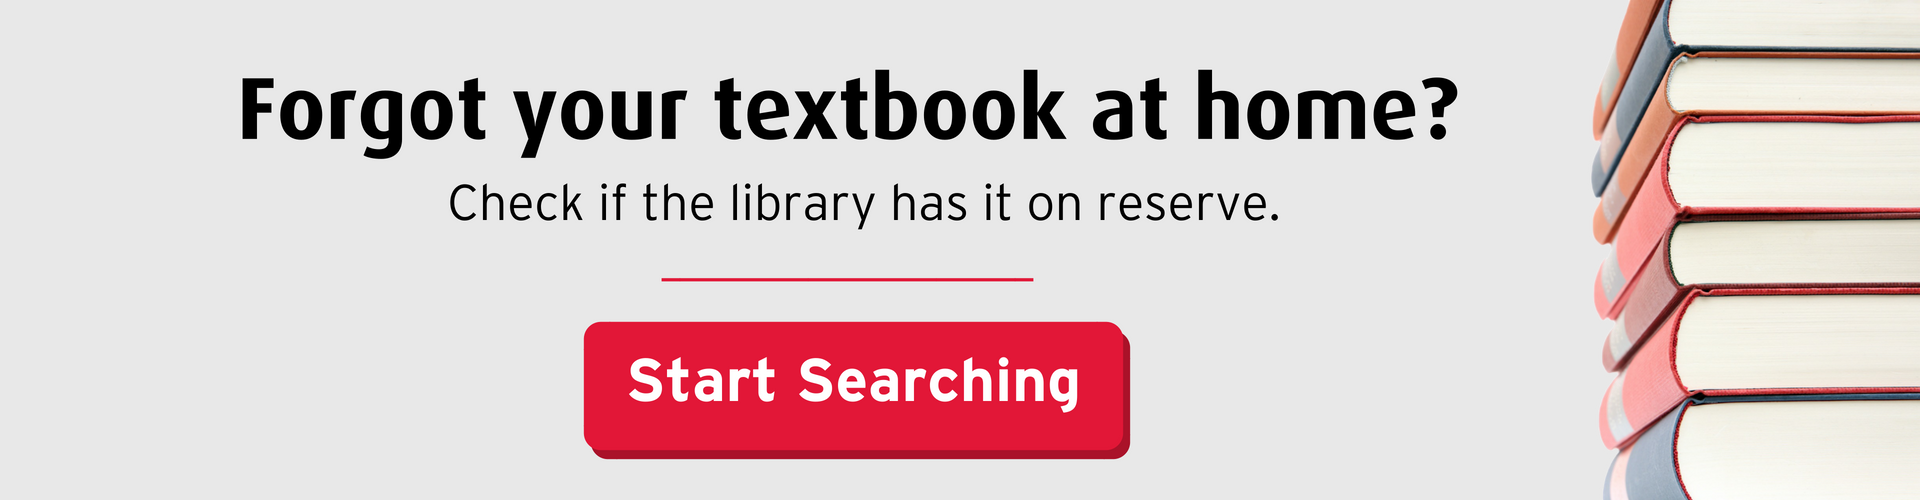 Decorative image that says "Forgot your textbook at home? Check if the library has it on reserve"